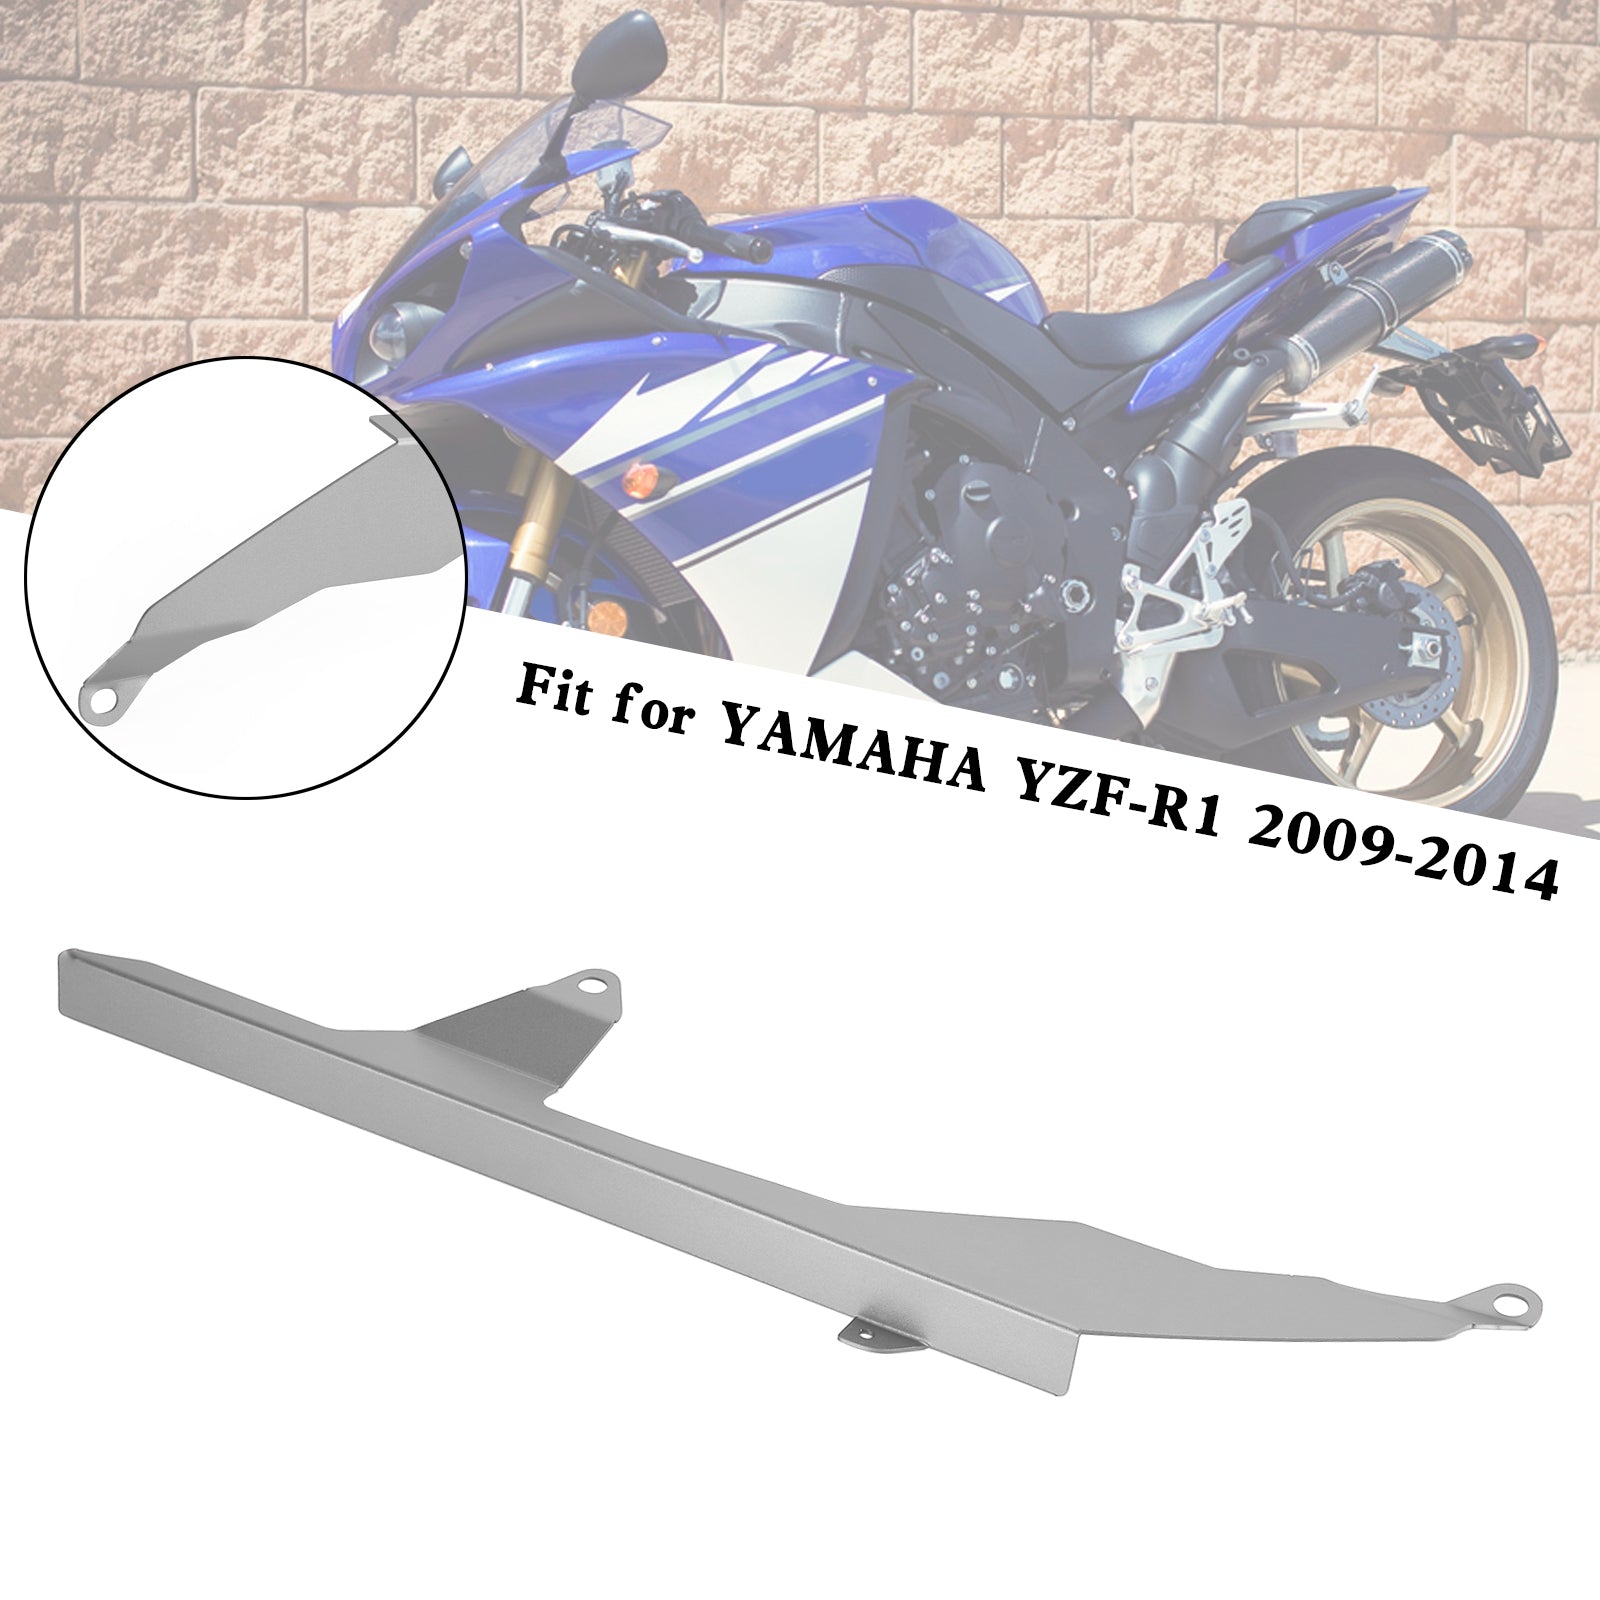 Rear Sprocket Chain Guard Protector Cover For YAMAHA YZF R1 2009-2014 Generic